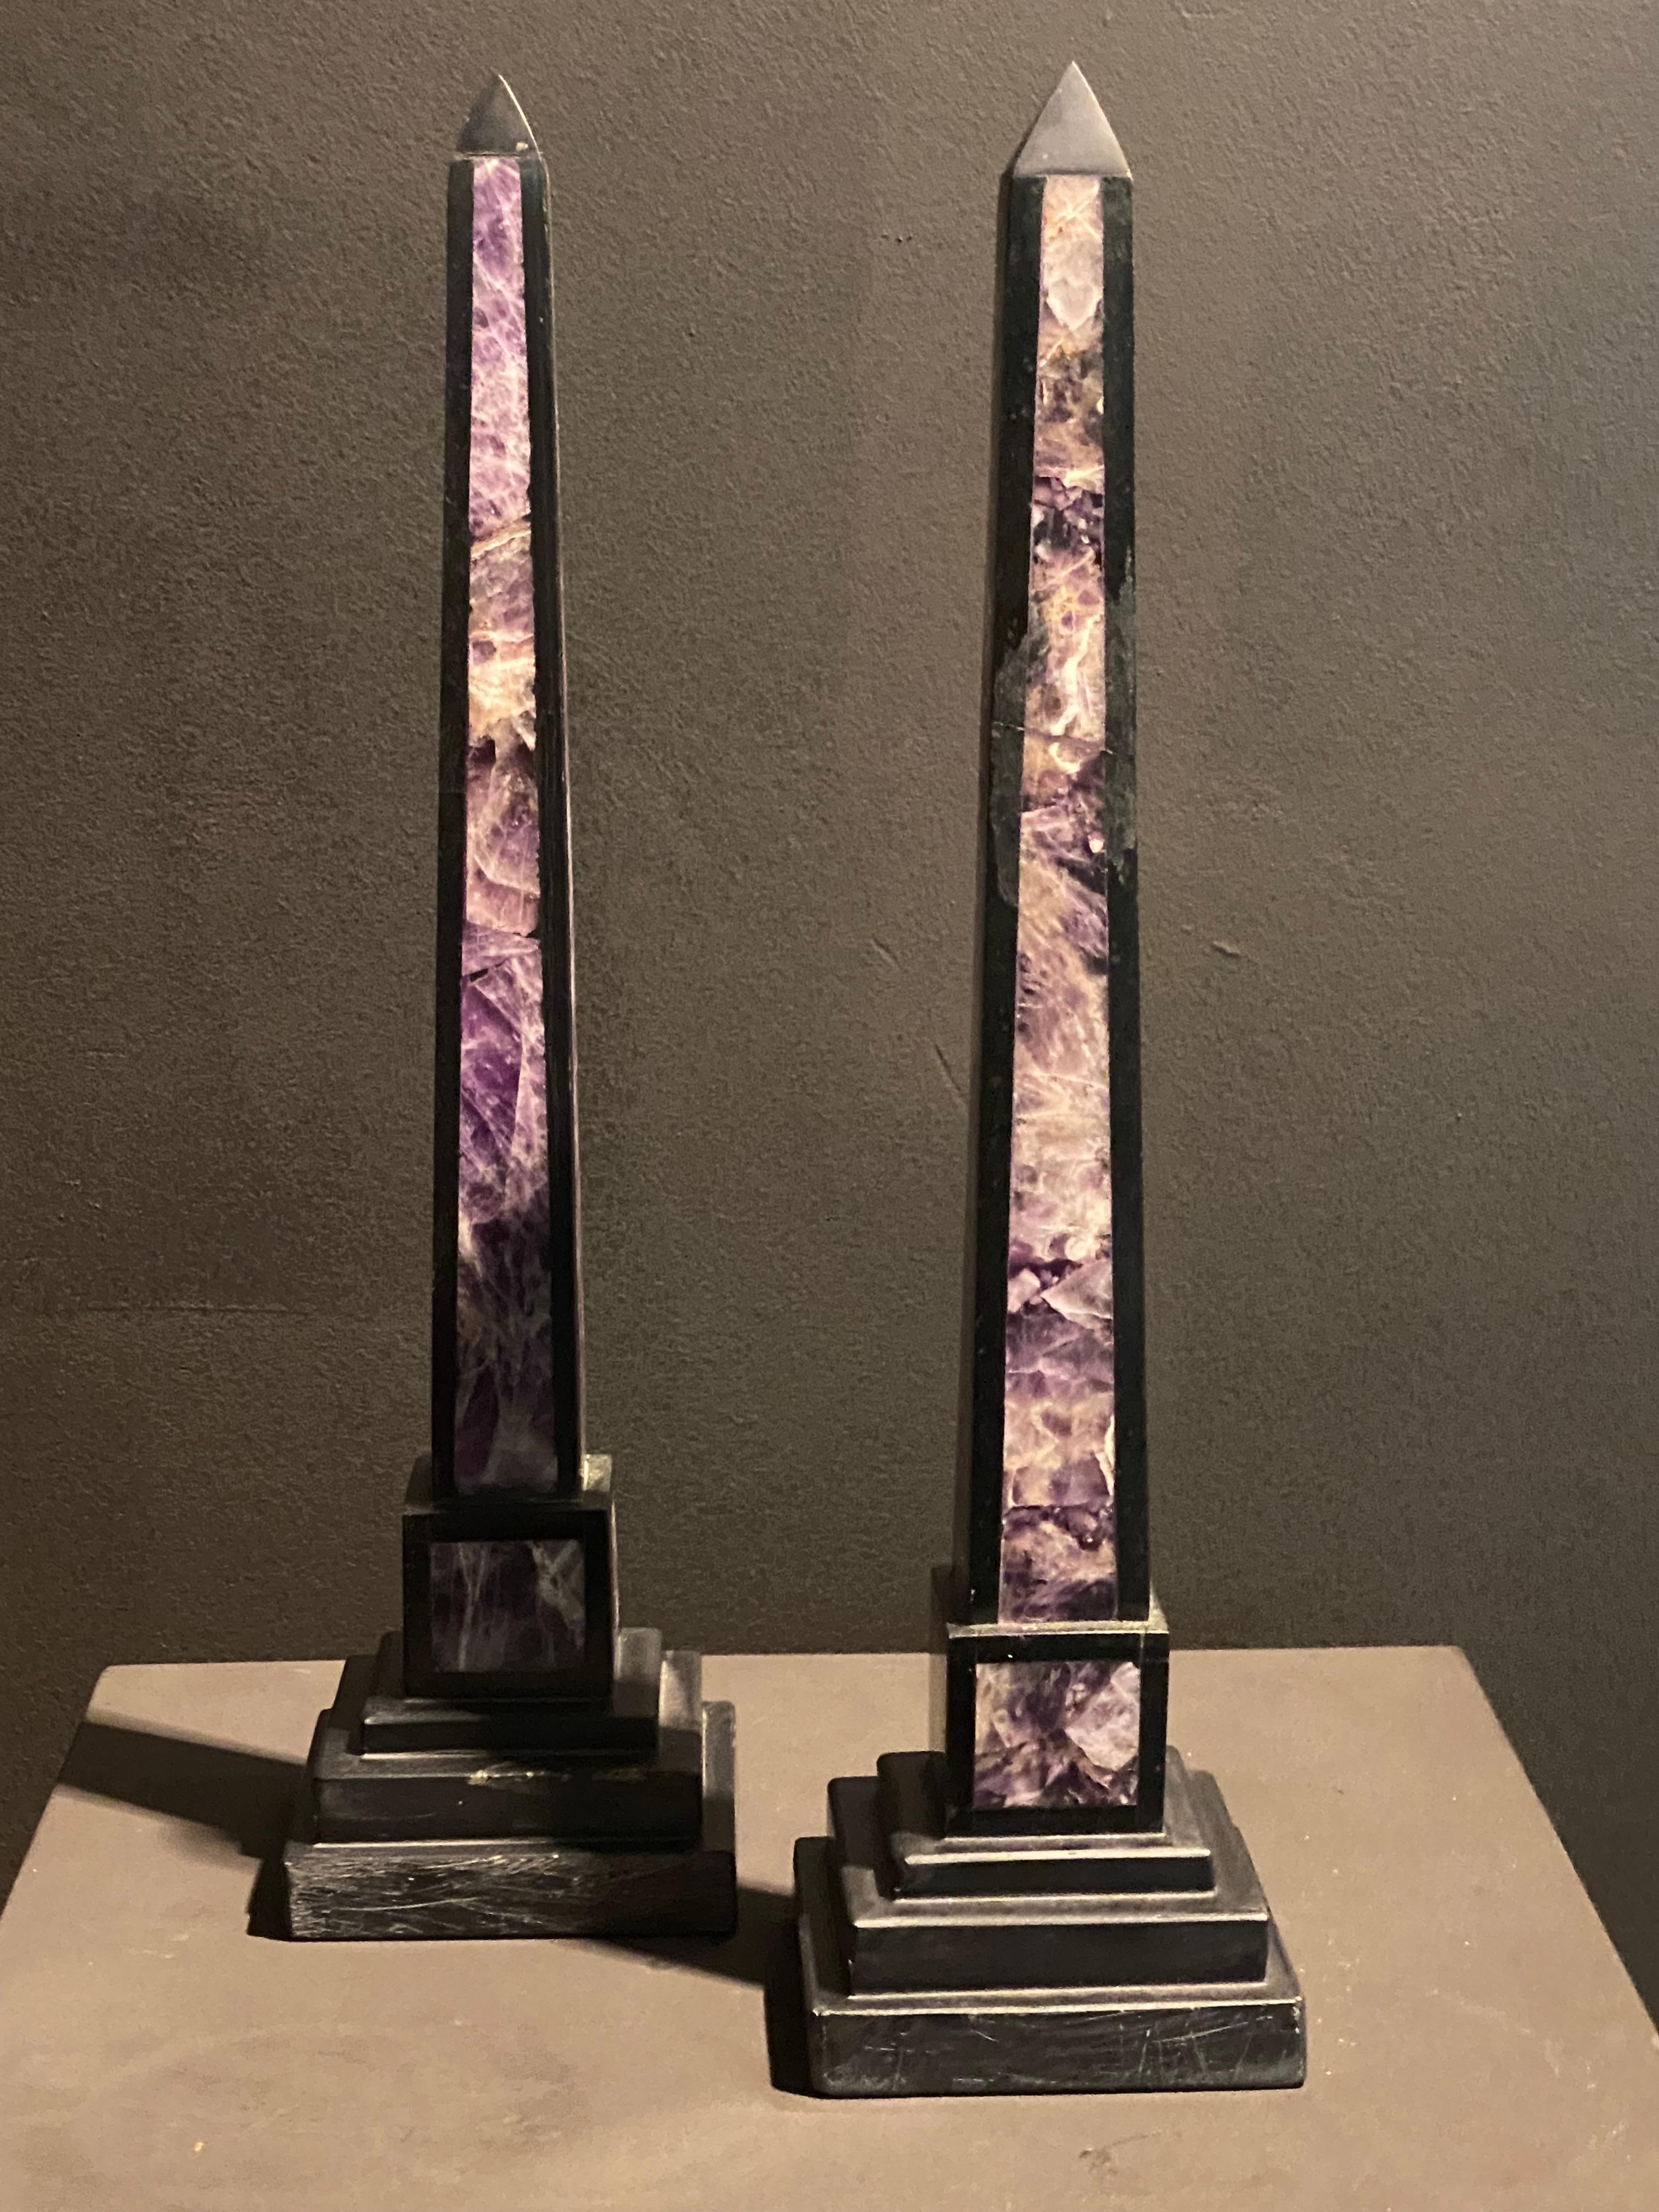 Elegant ,antique Pair of Obelisks,England from around 1920,
made in Black Stone and Amethyst,
good, old Patina of the Stone,
mint condition,very decorative objects to be used in different settings